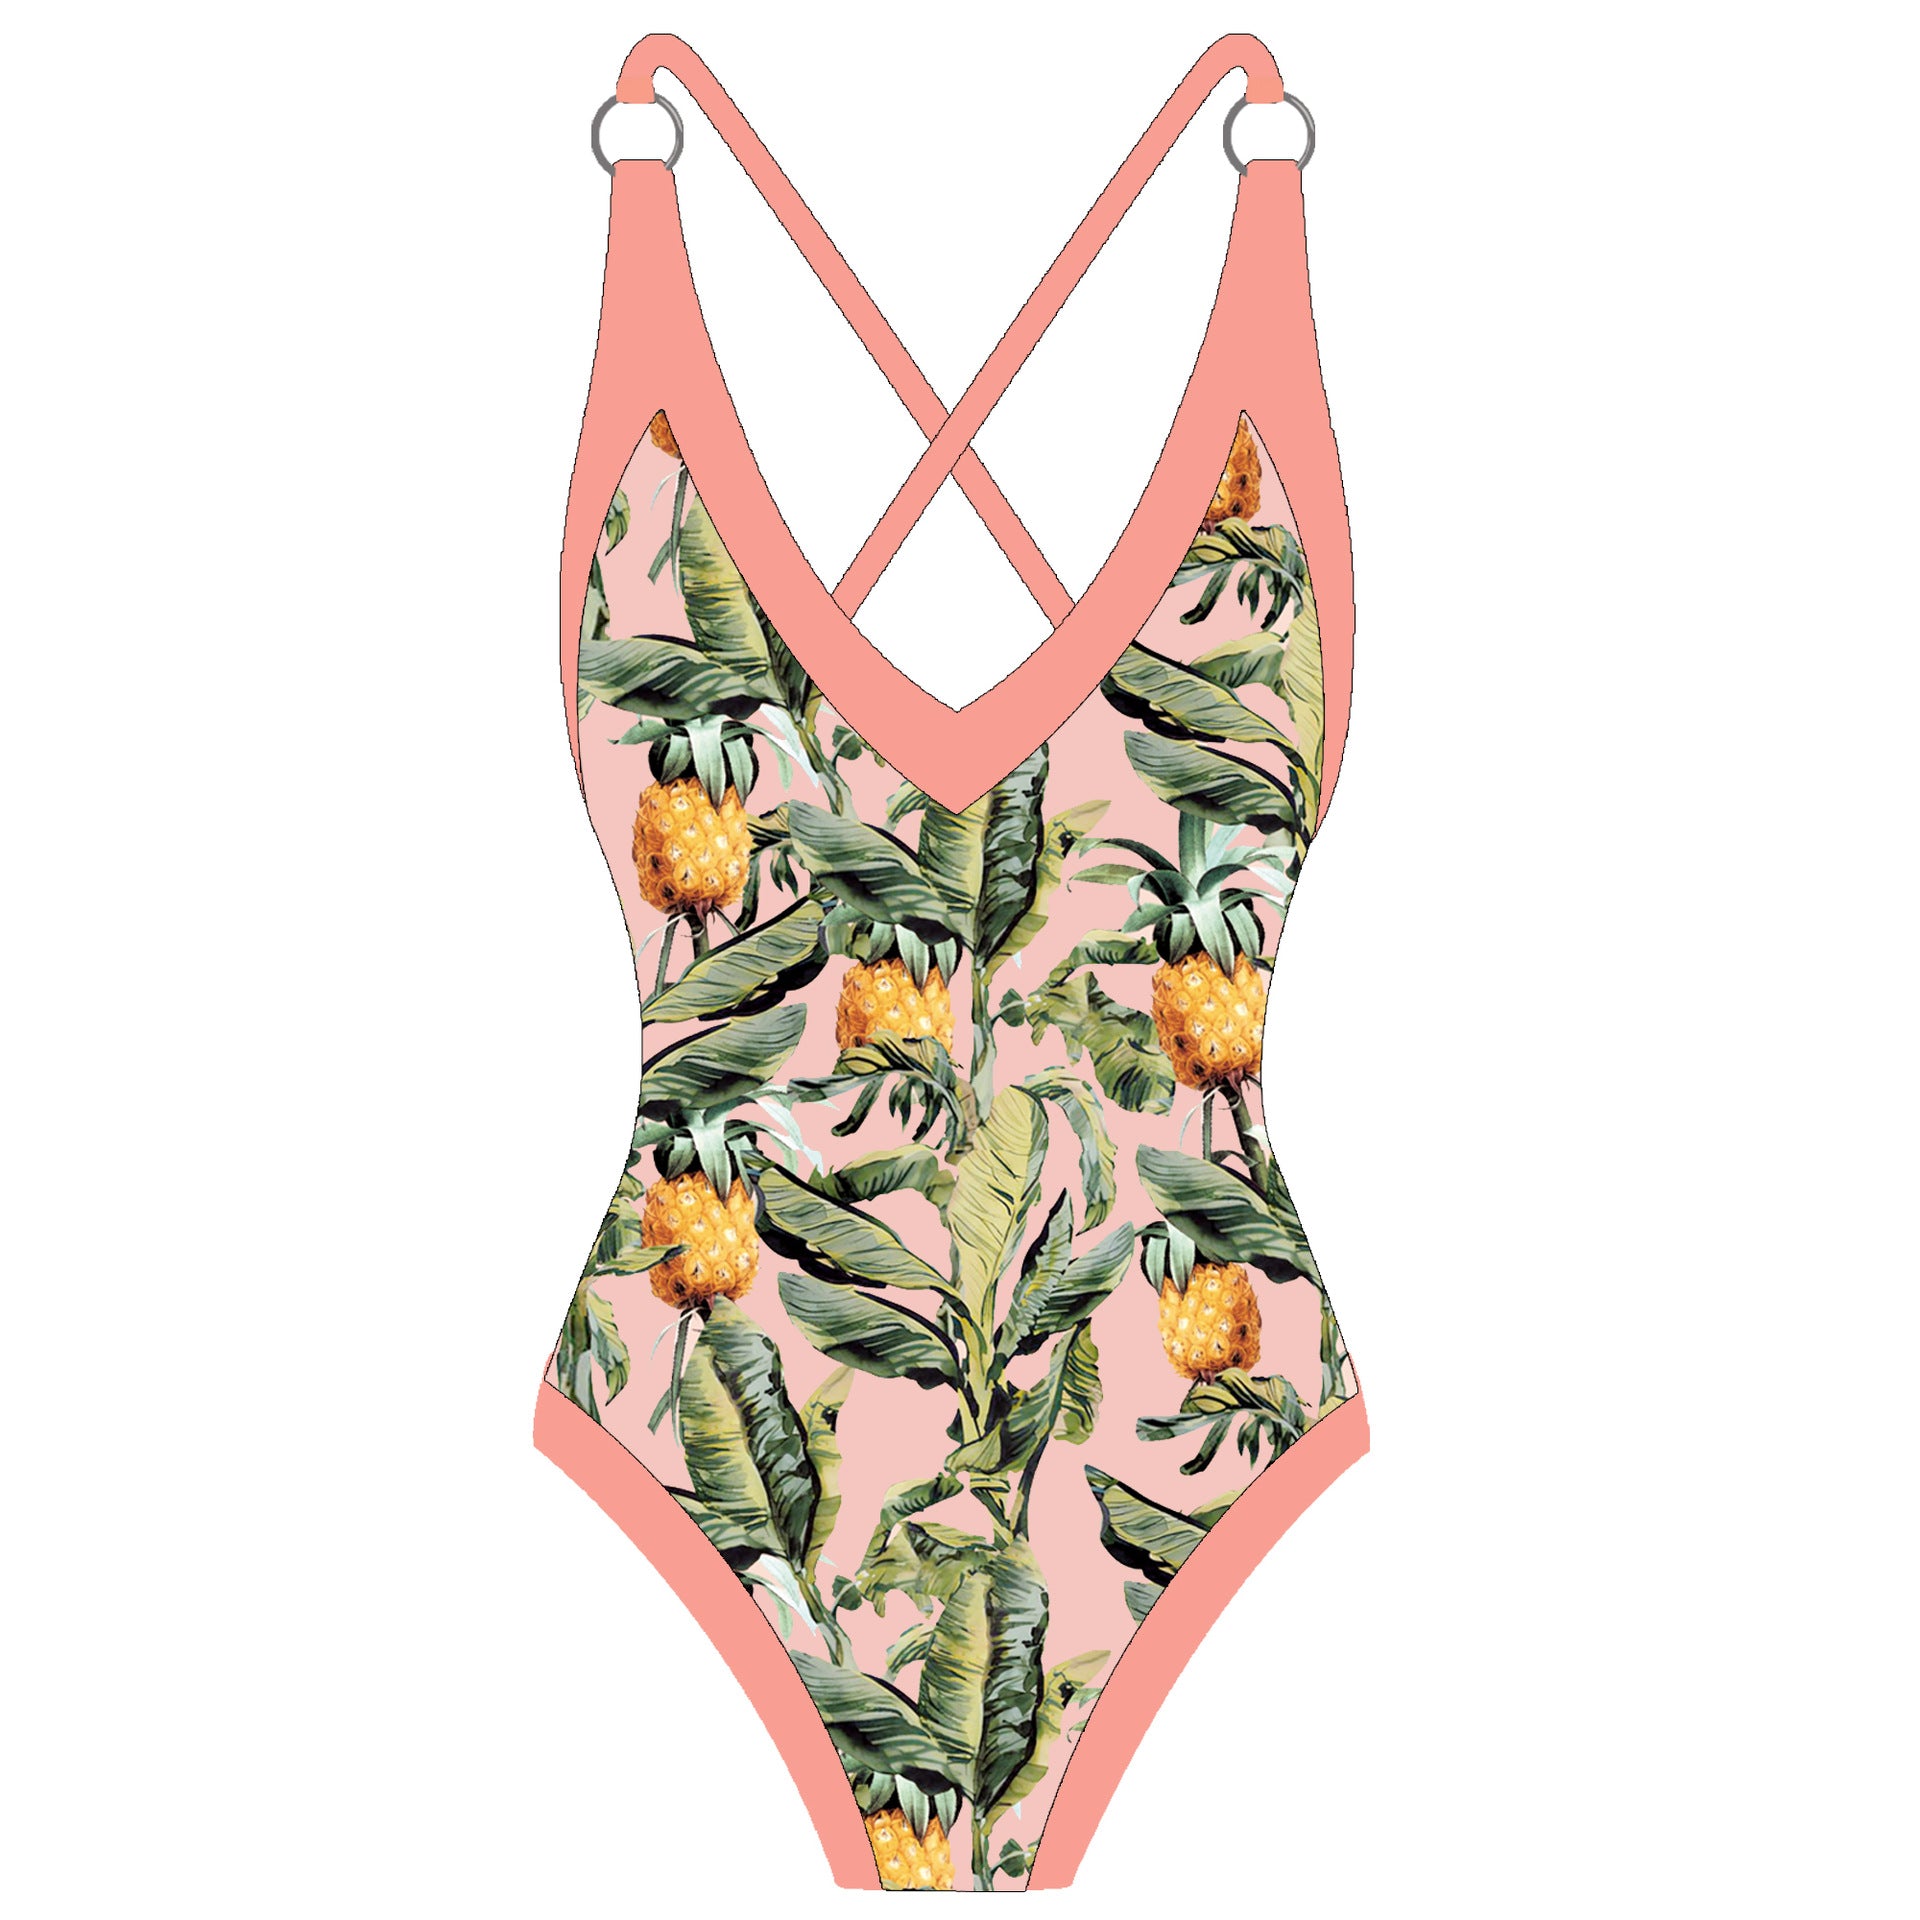 Women's 1 Piece Swimsuit + Vintage Printed Swimsuit - Pink